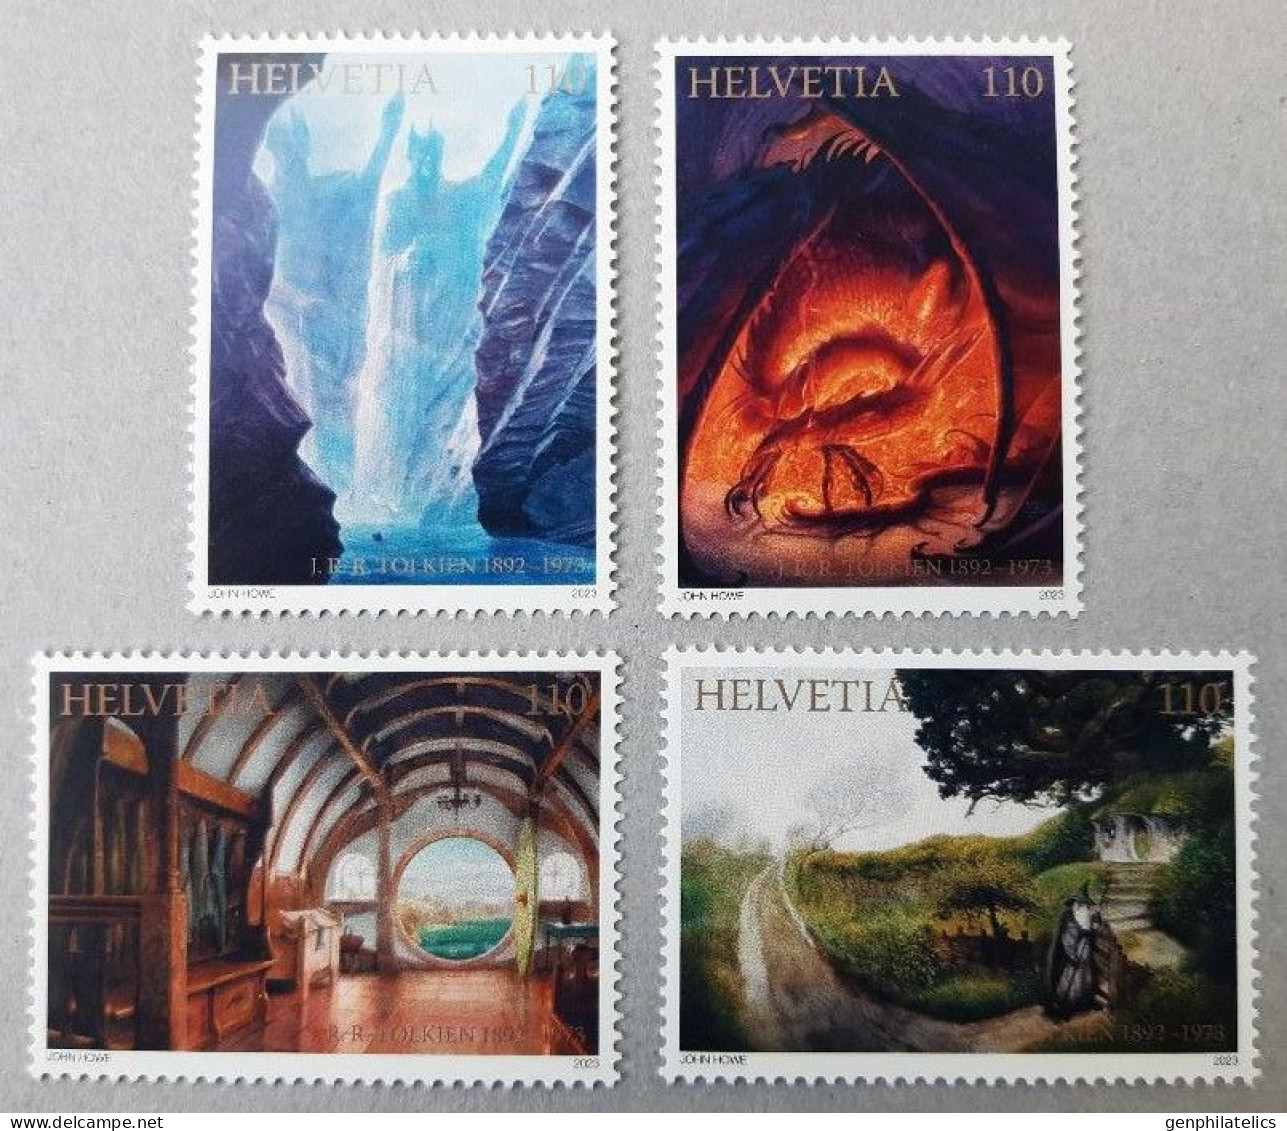 SWITZERLAND 2023 PEOPLE Famous Persons - J.R.R. TOLKIEN - Fine Set (self-adhesive) MNH - Unused Stamps